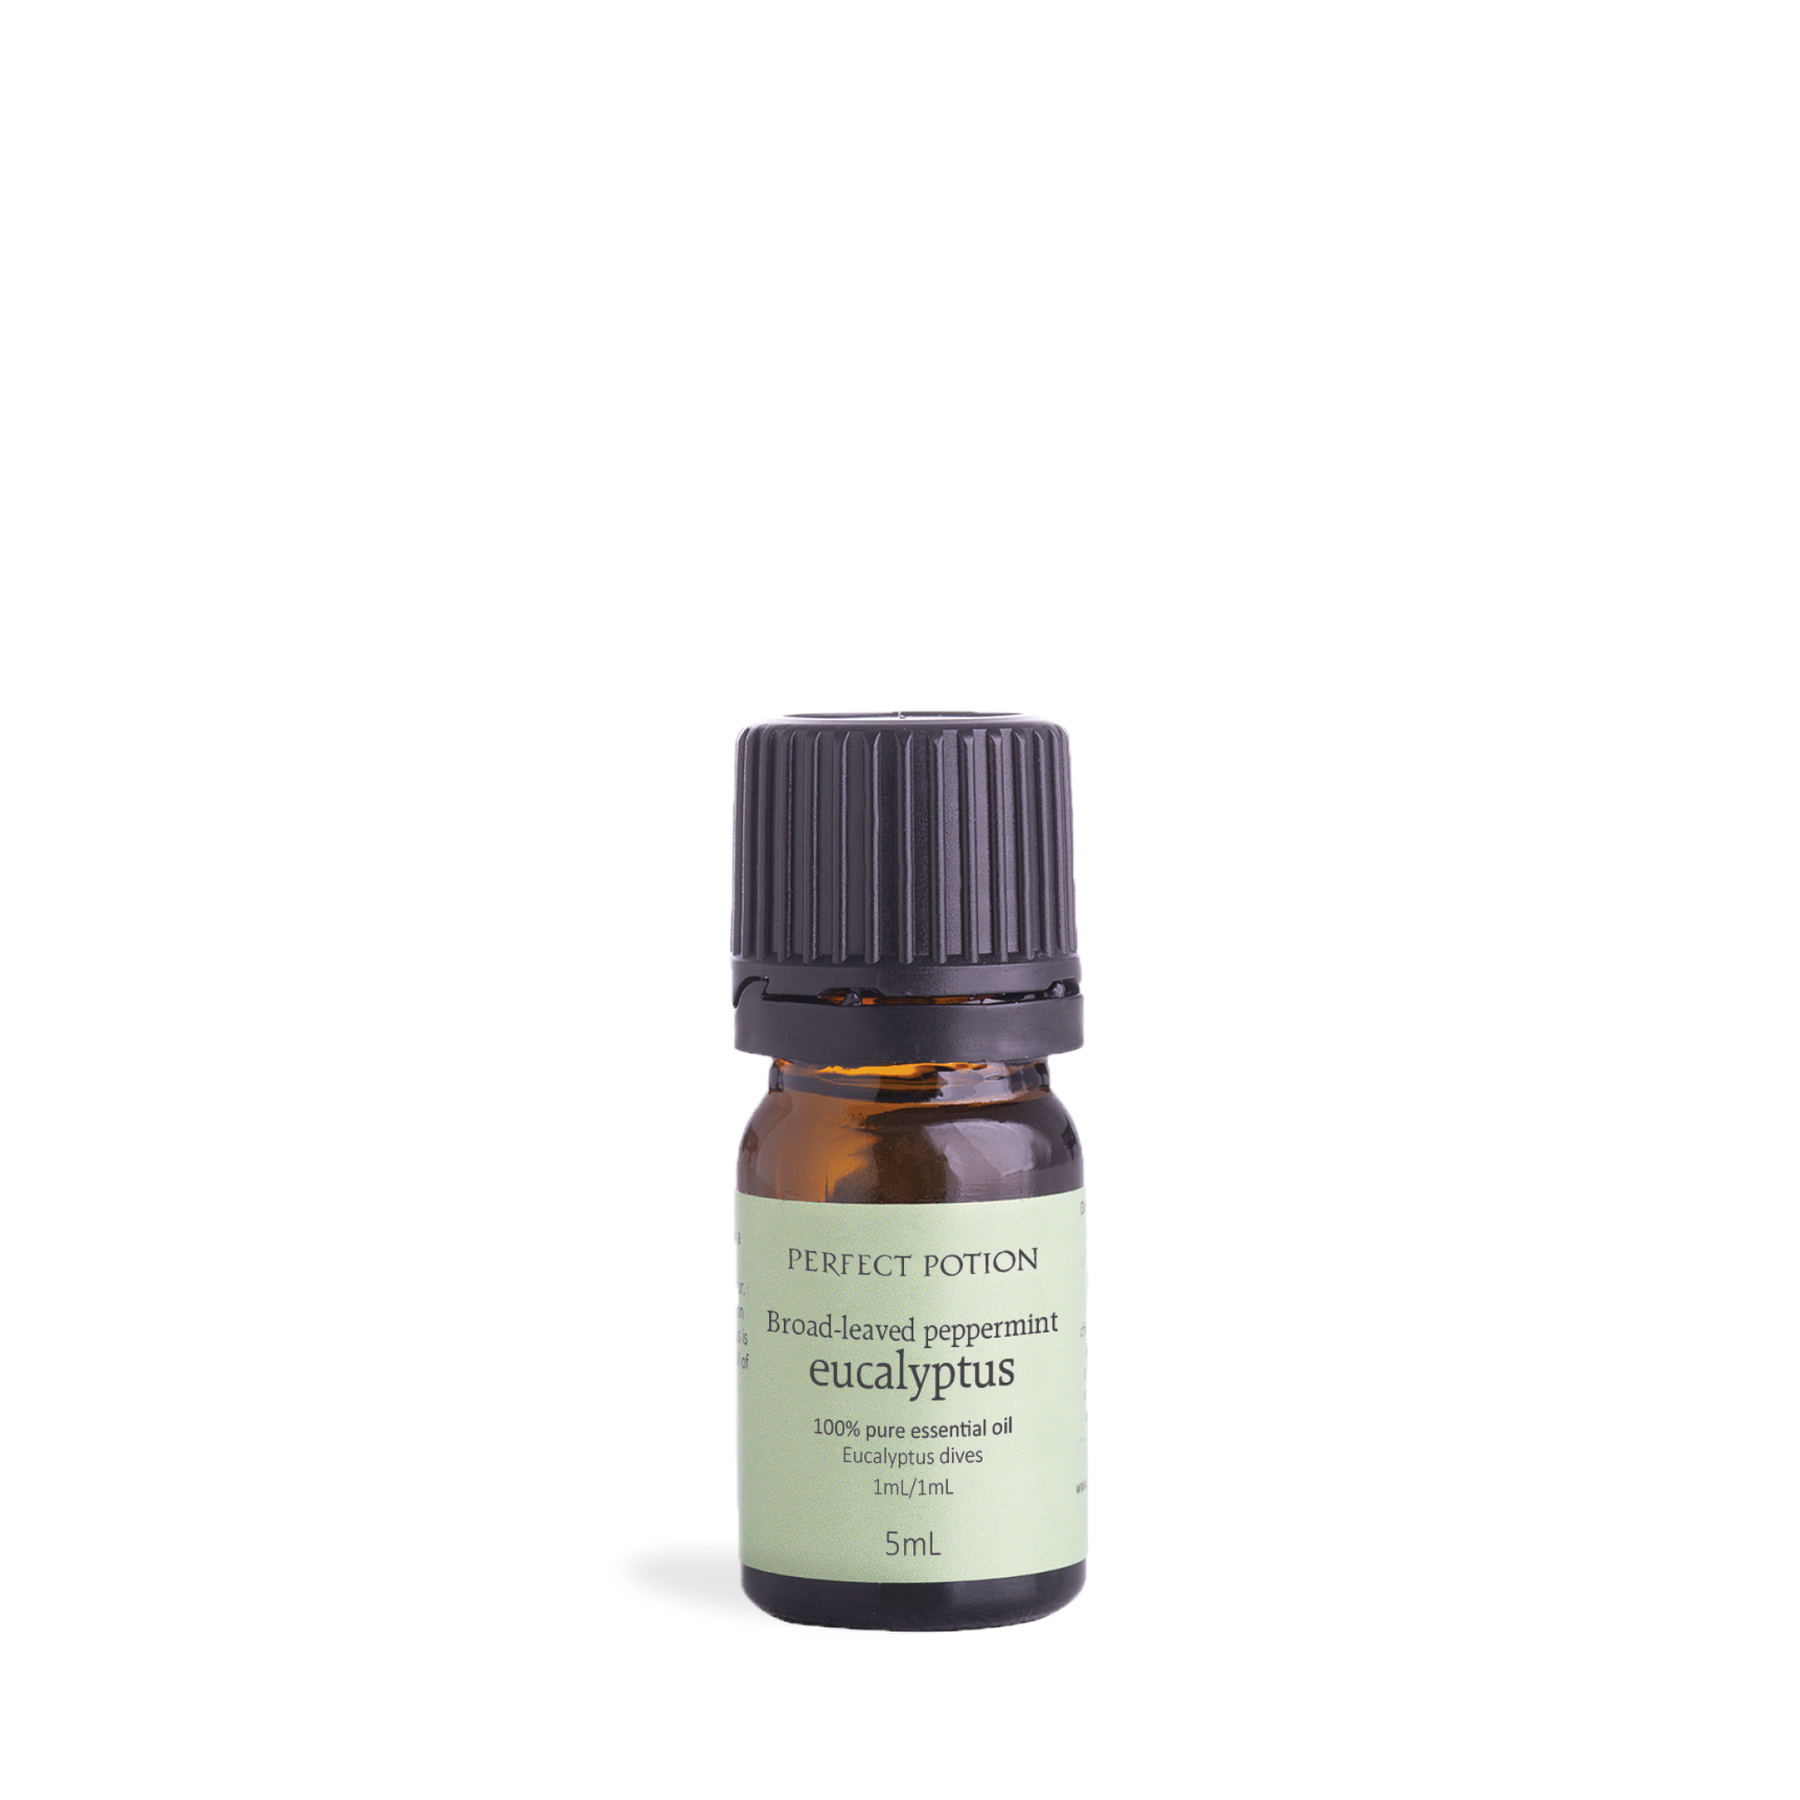 Eucalyptus Broad-Leaved Peppermint Pure Essential Oil